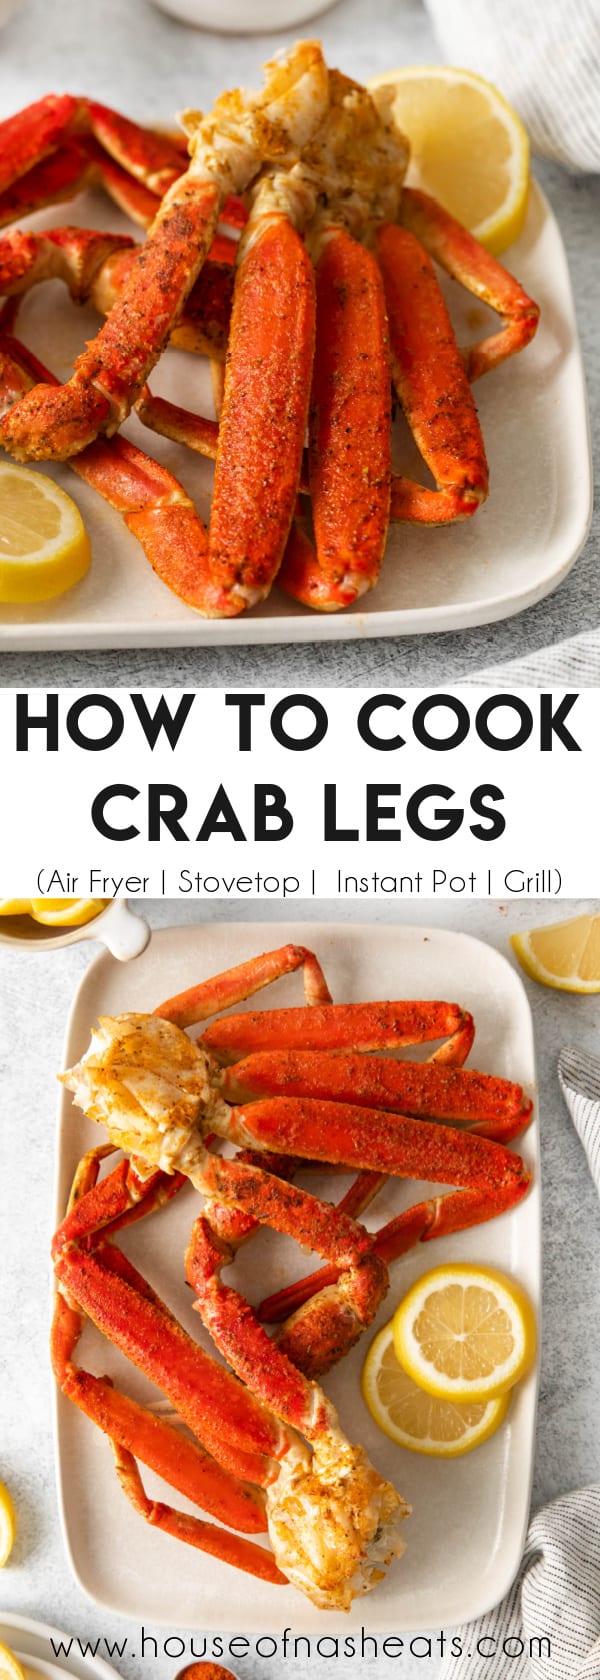 A collage of images of cooked crab legs on a plate with text overlay.